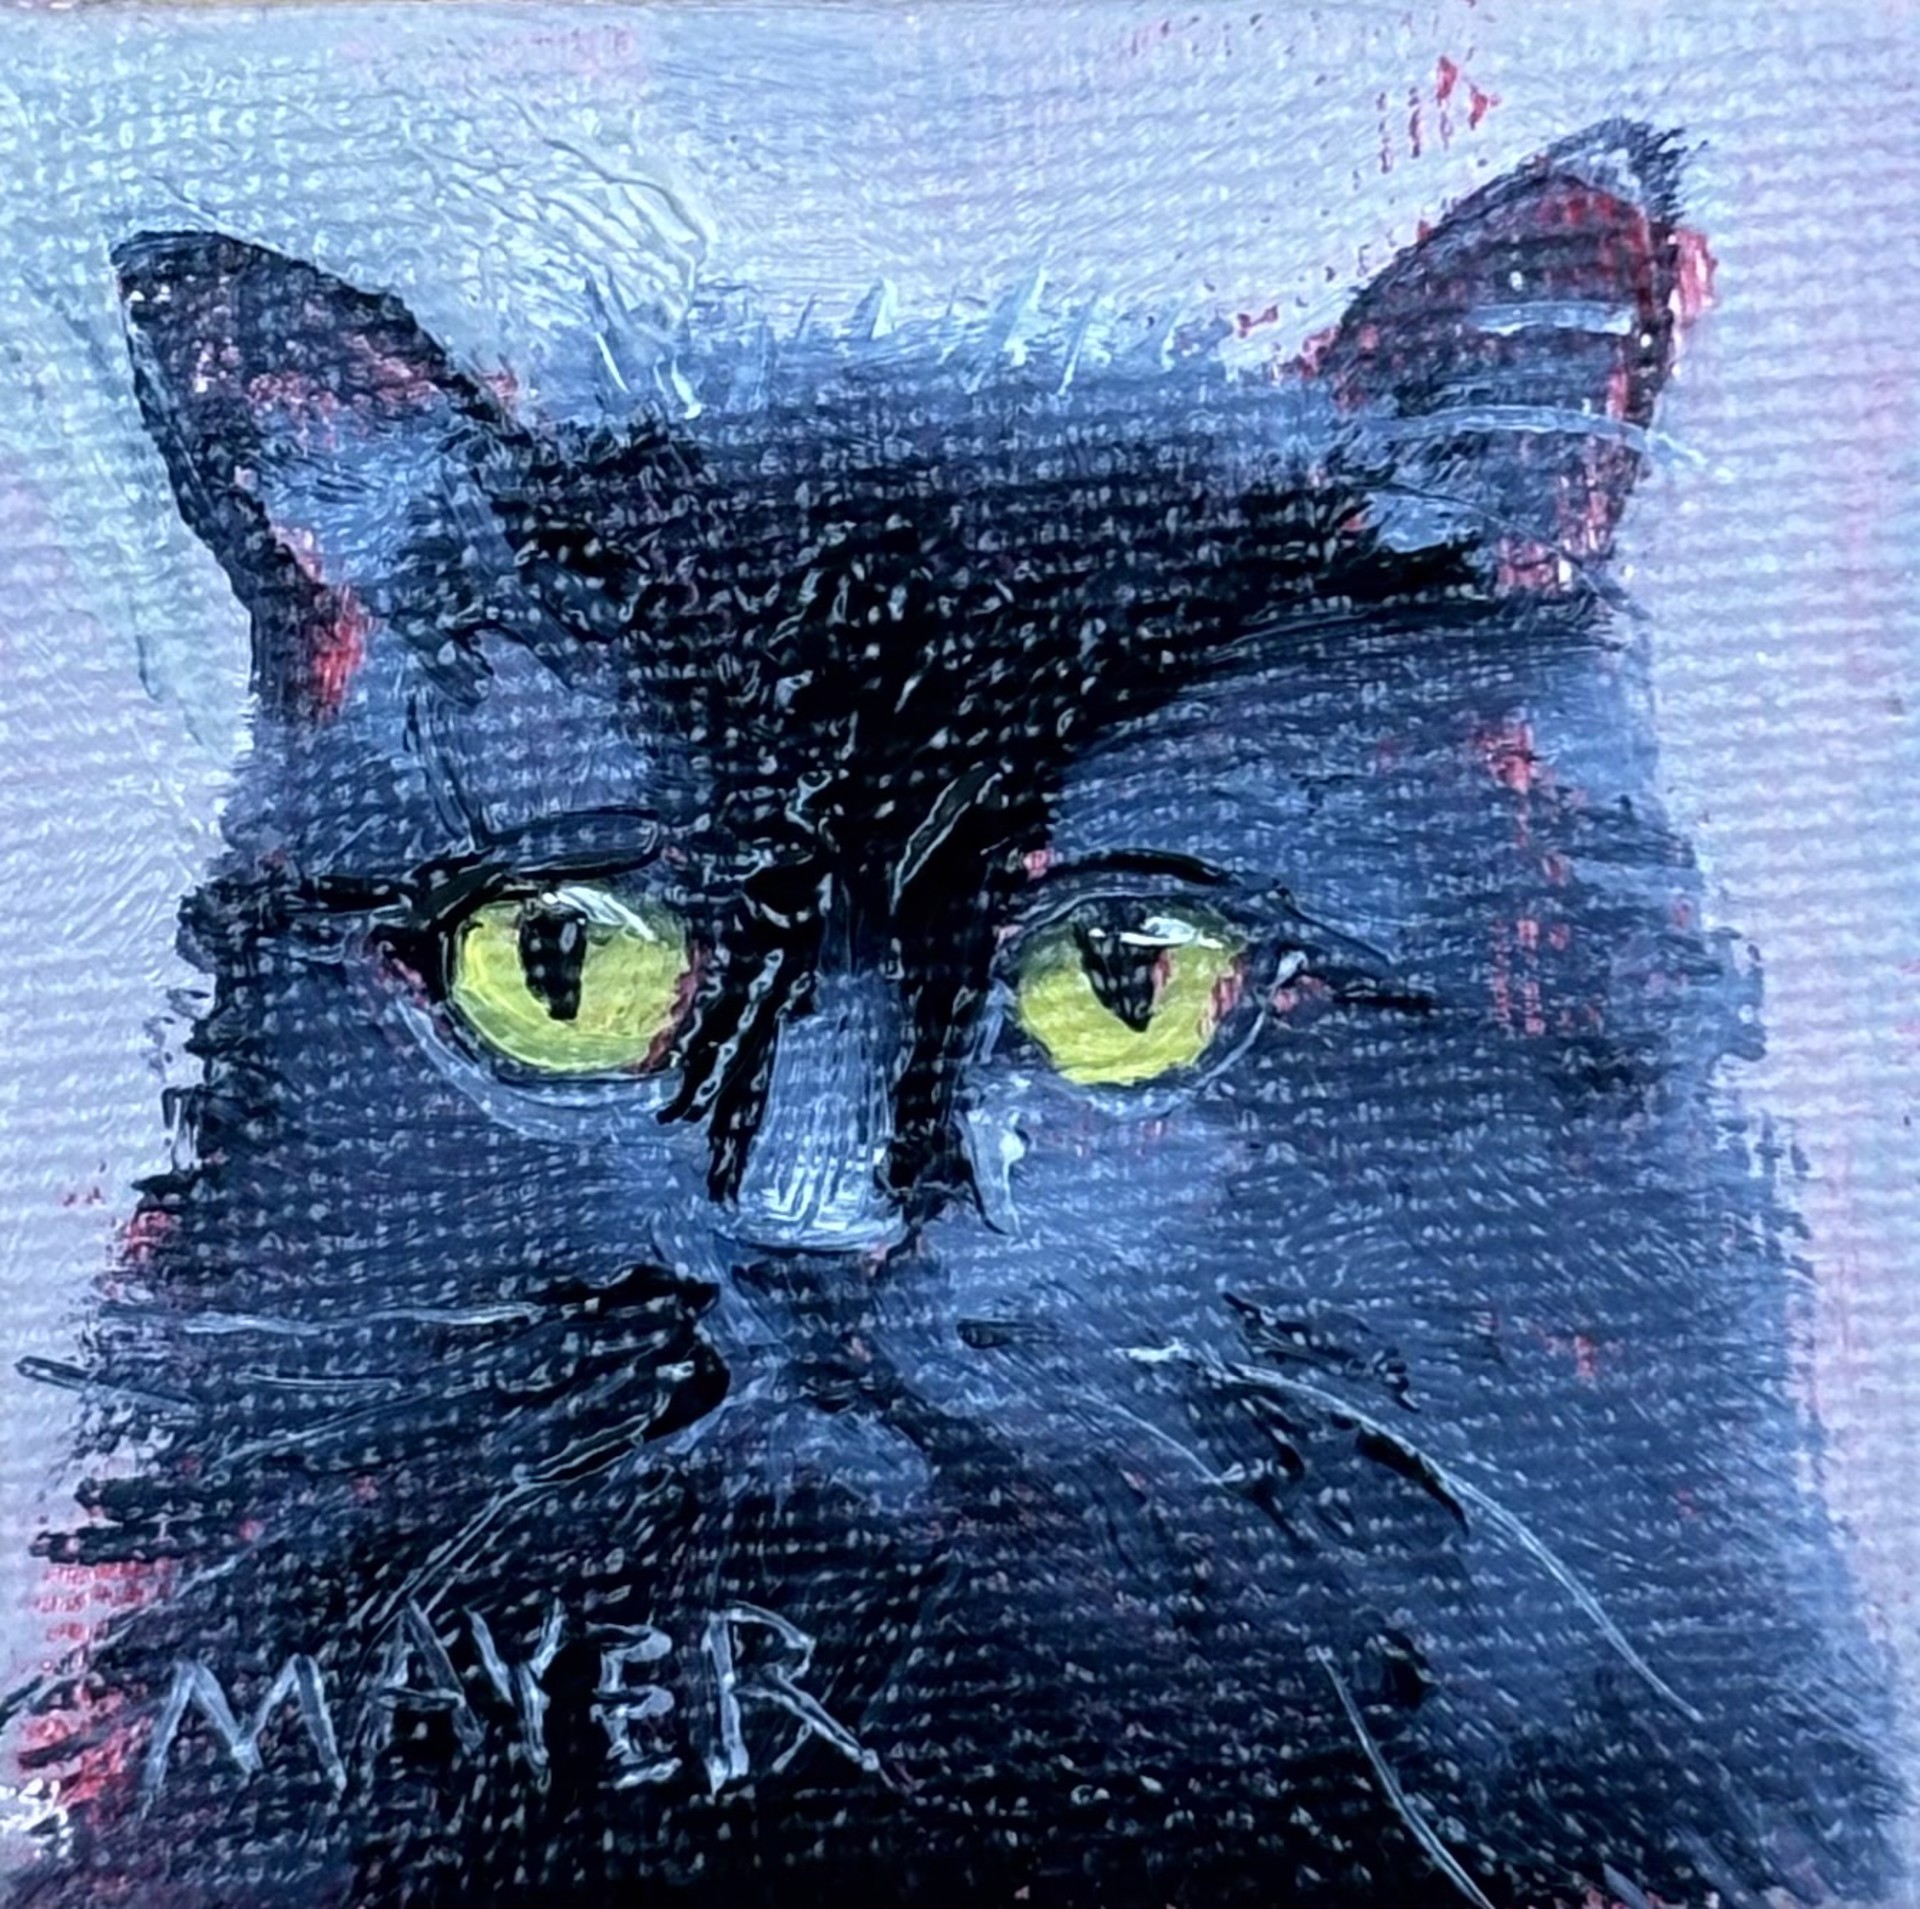 Black Cat Mini Painting by Maggie Mayer